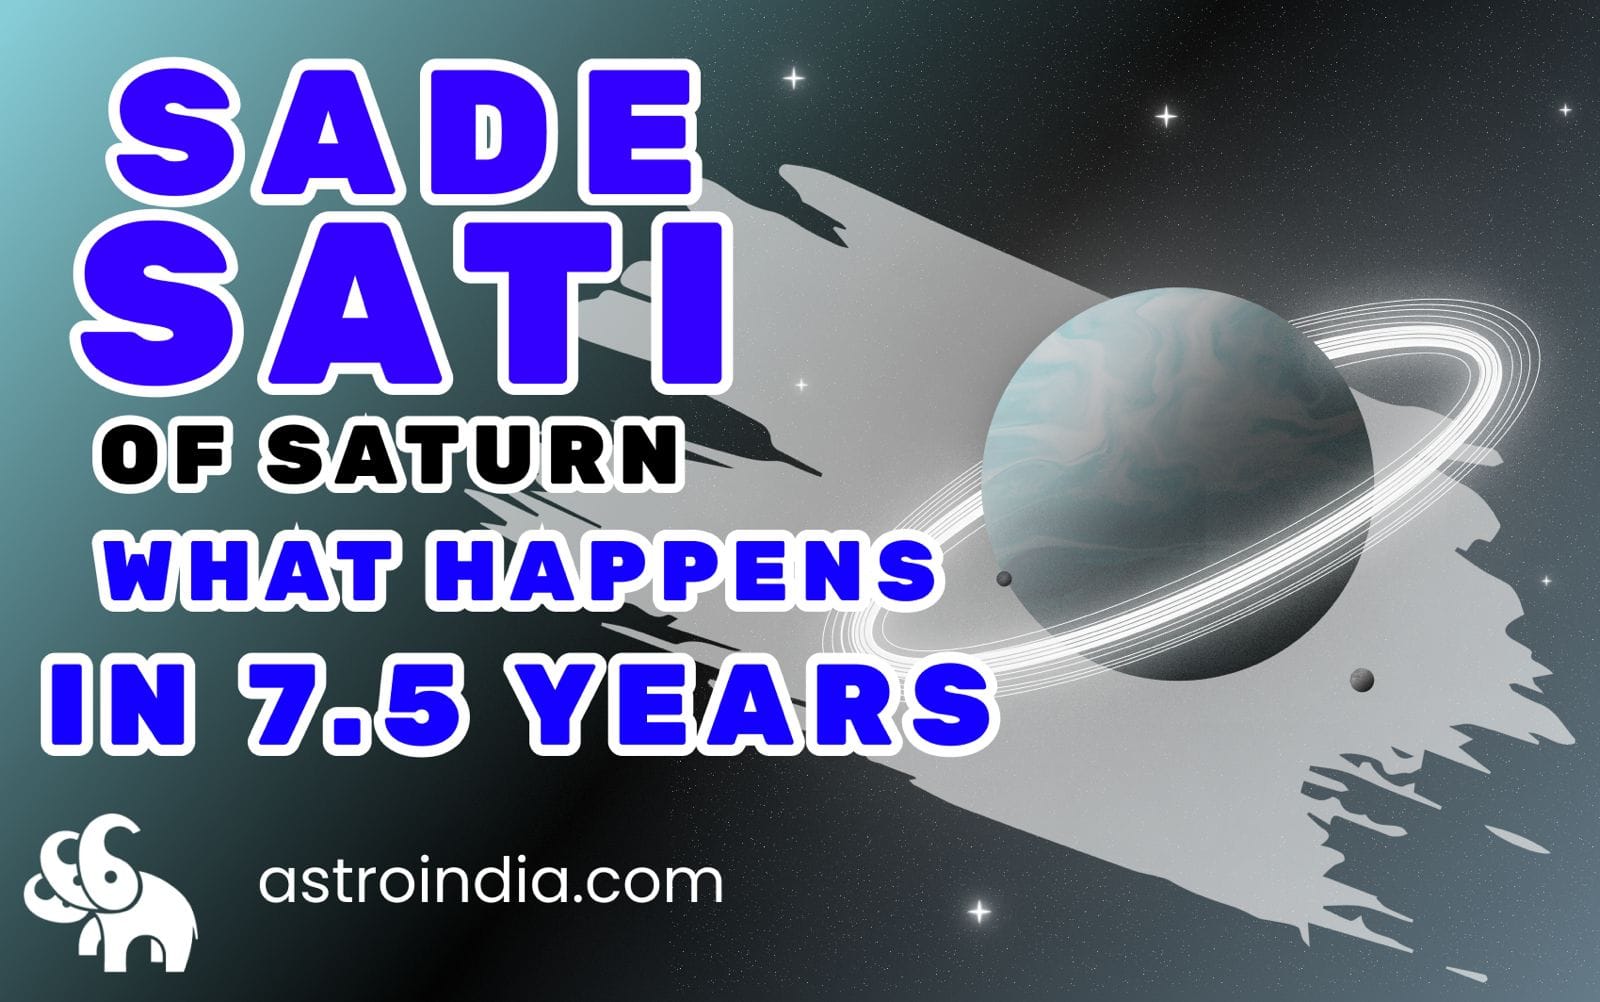 Sade Sati: The Influence of Shani on Your Life